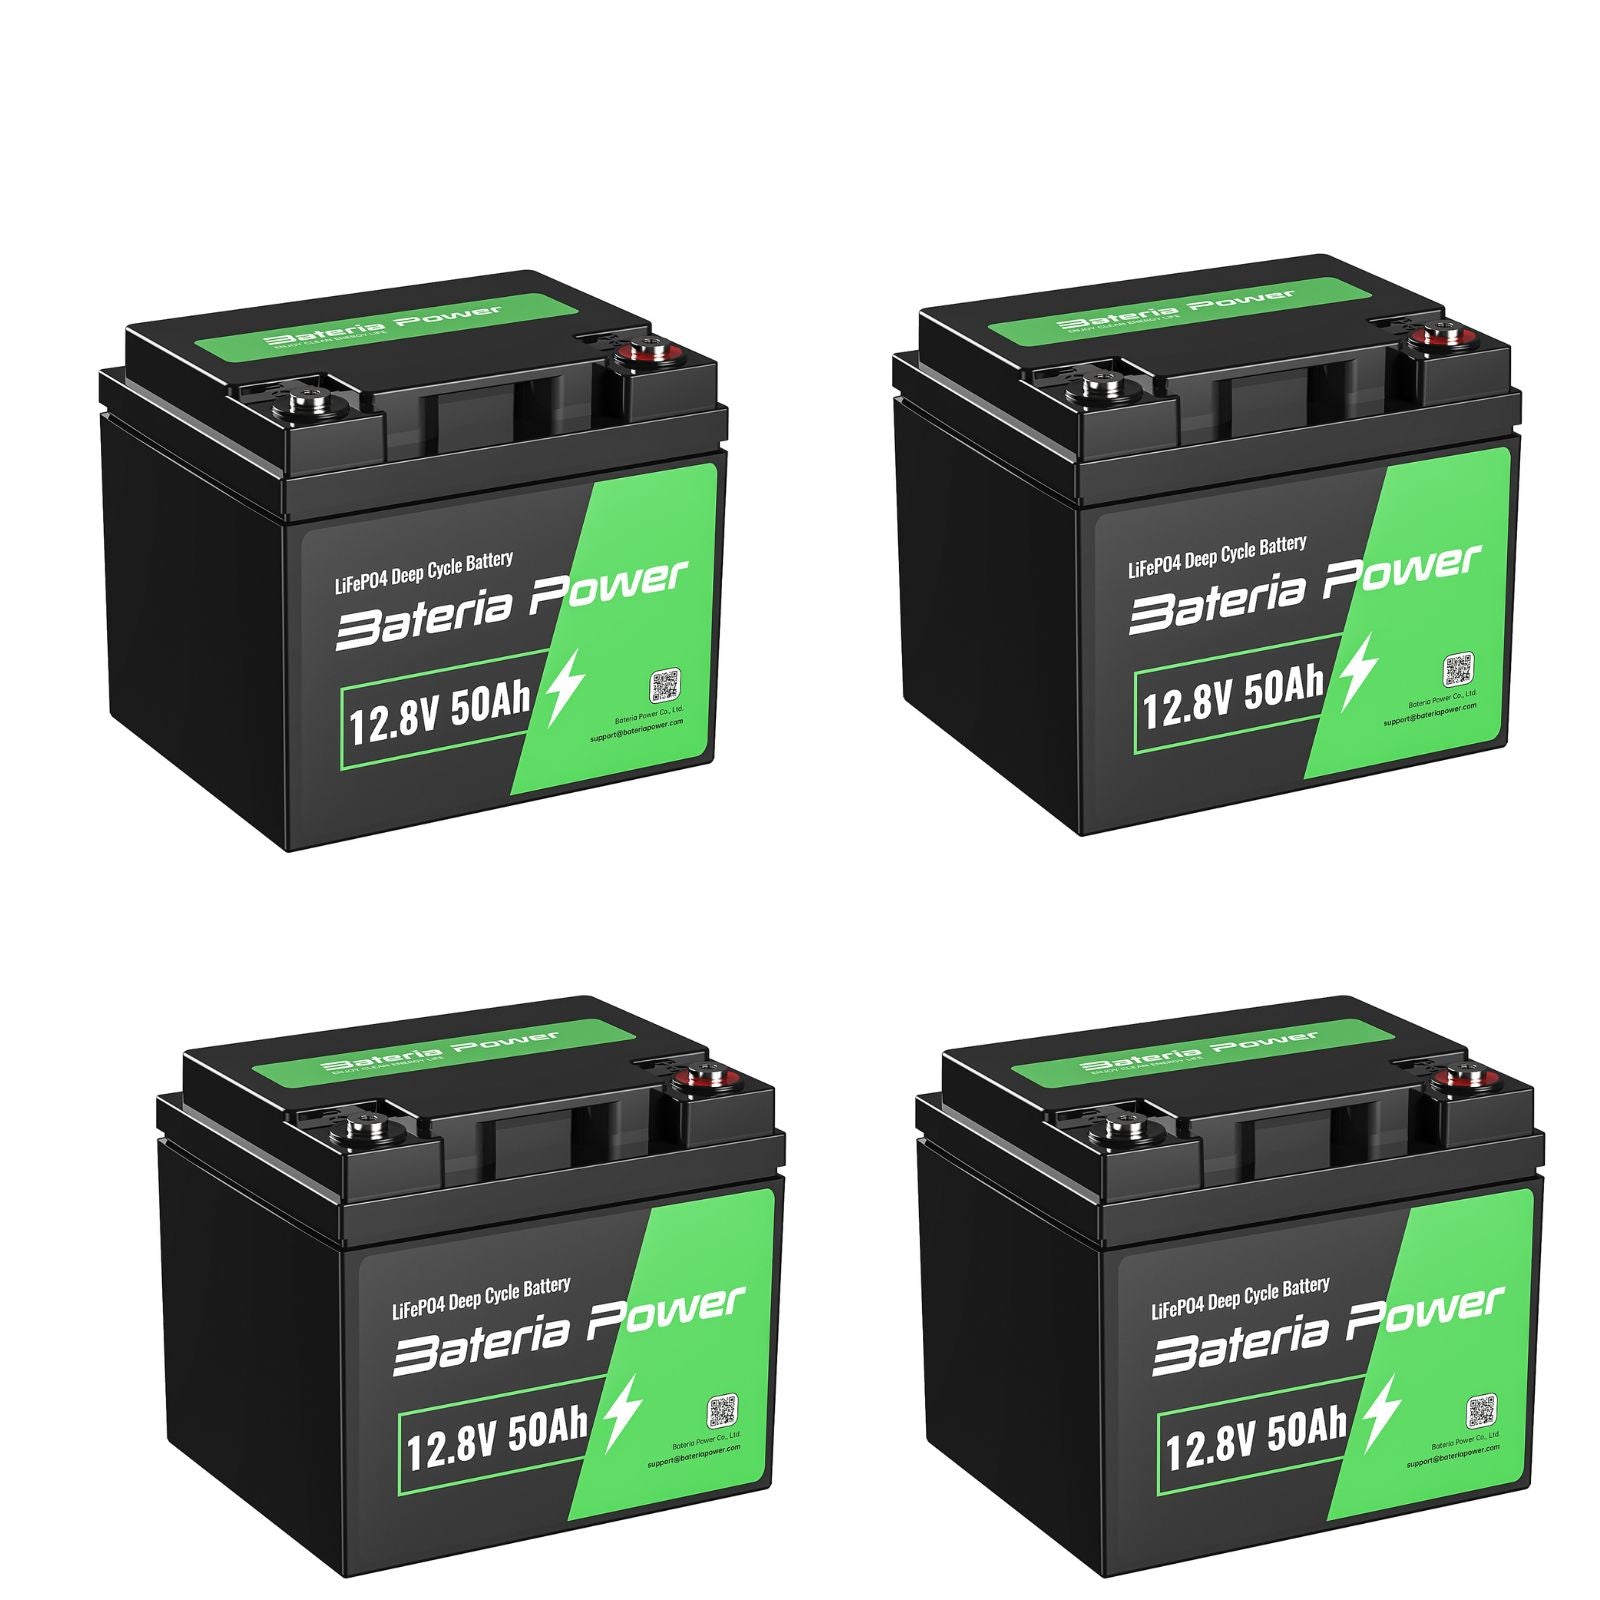 LiTime 12V 50Ah LiFePO4 Lithium Battery, Build-In 50A BMS, 640Wh Energy - 2  Pack ($197.99/each)